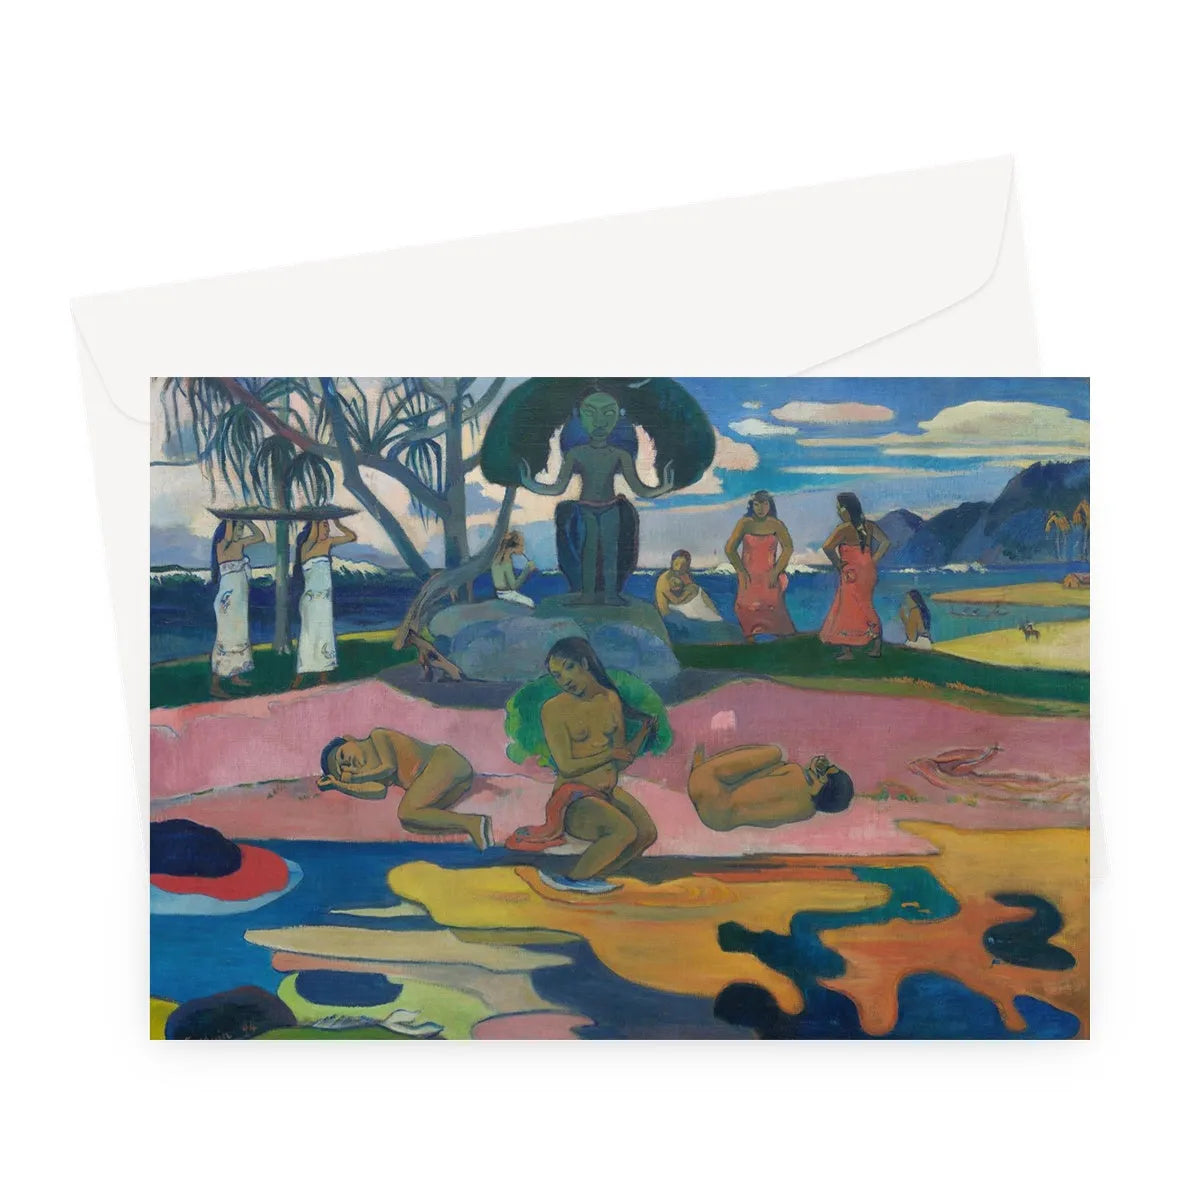 Day Of The God By Paul Gauguin Greeting Card - A5 Landscape / 1 Card - Greeting & Note Cards - Aesthetic Art